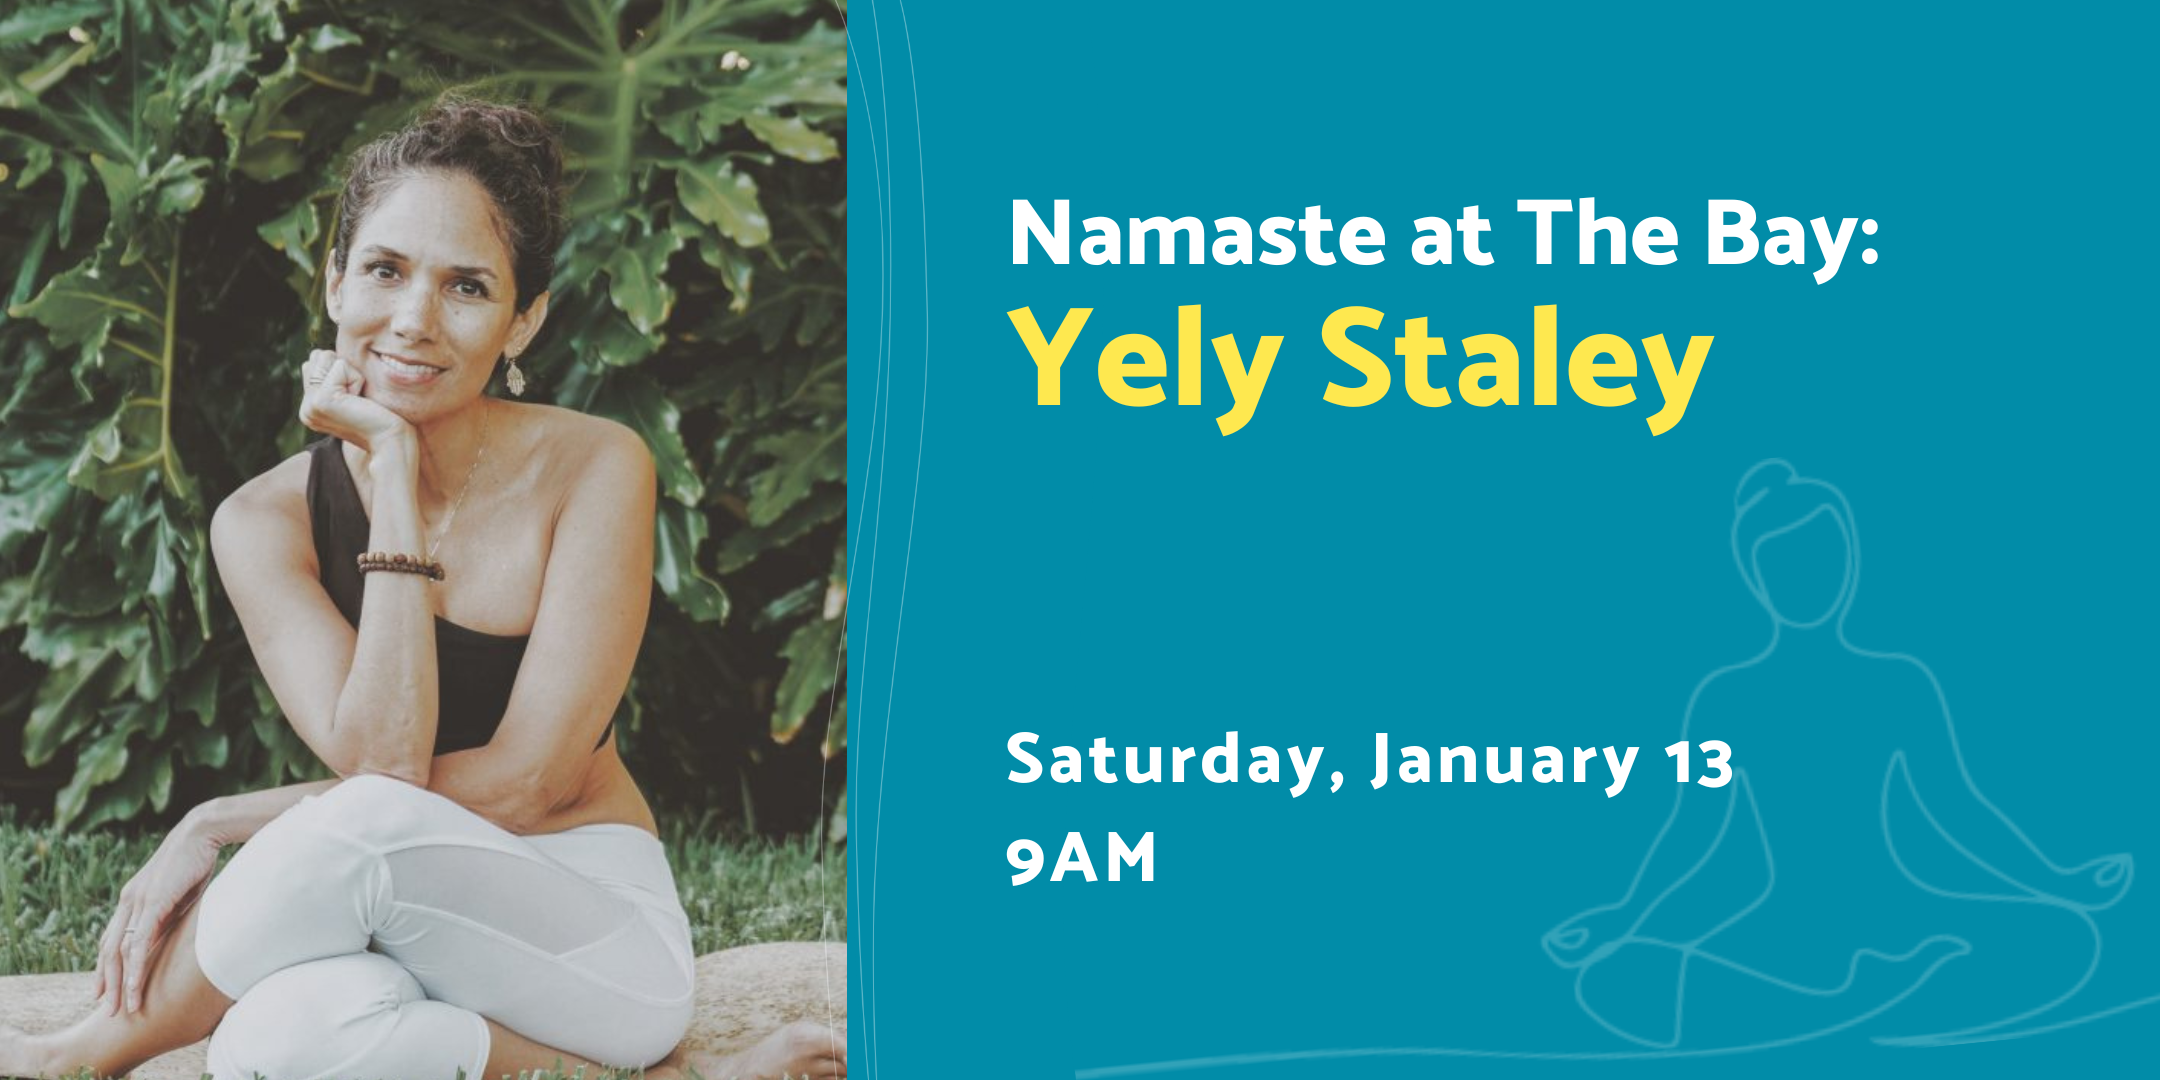 Namaste at The Bay with Yely Staley - The Bay Sarasota